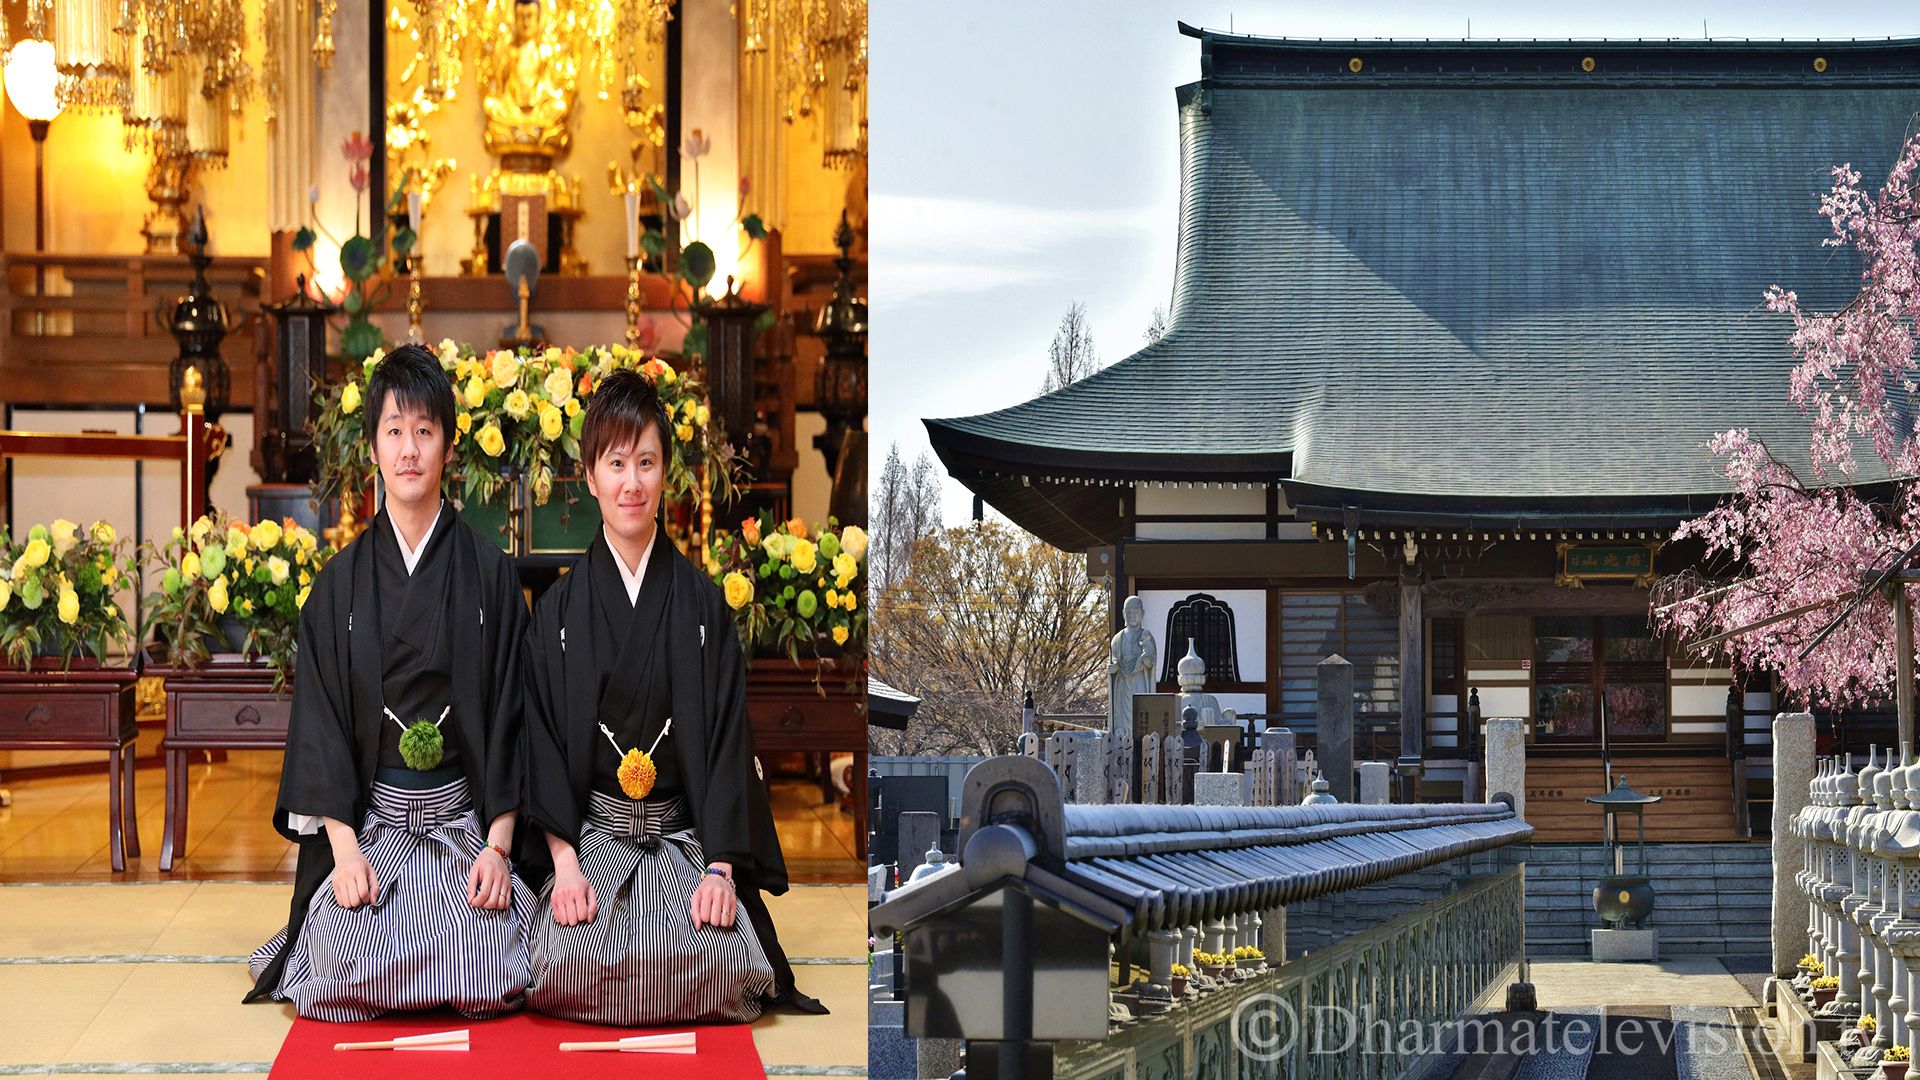 Saitama the Buddhist temple in Japan allow same sex marriage